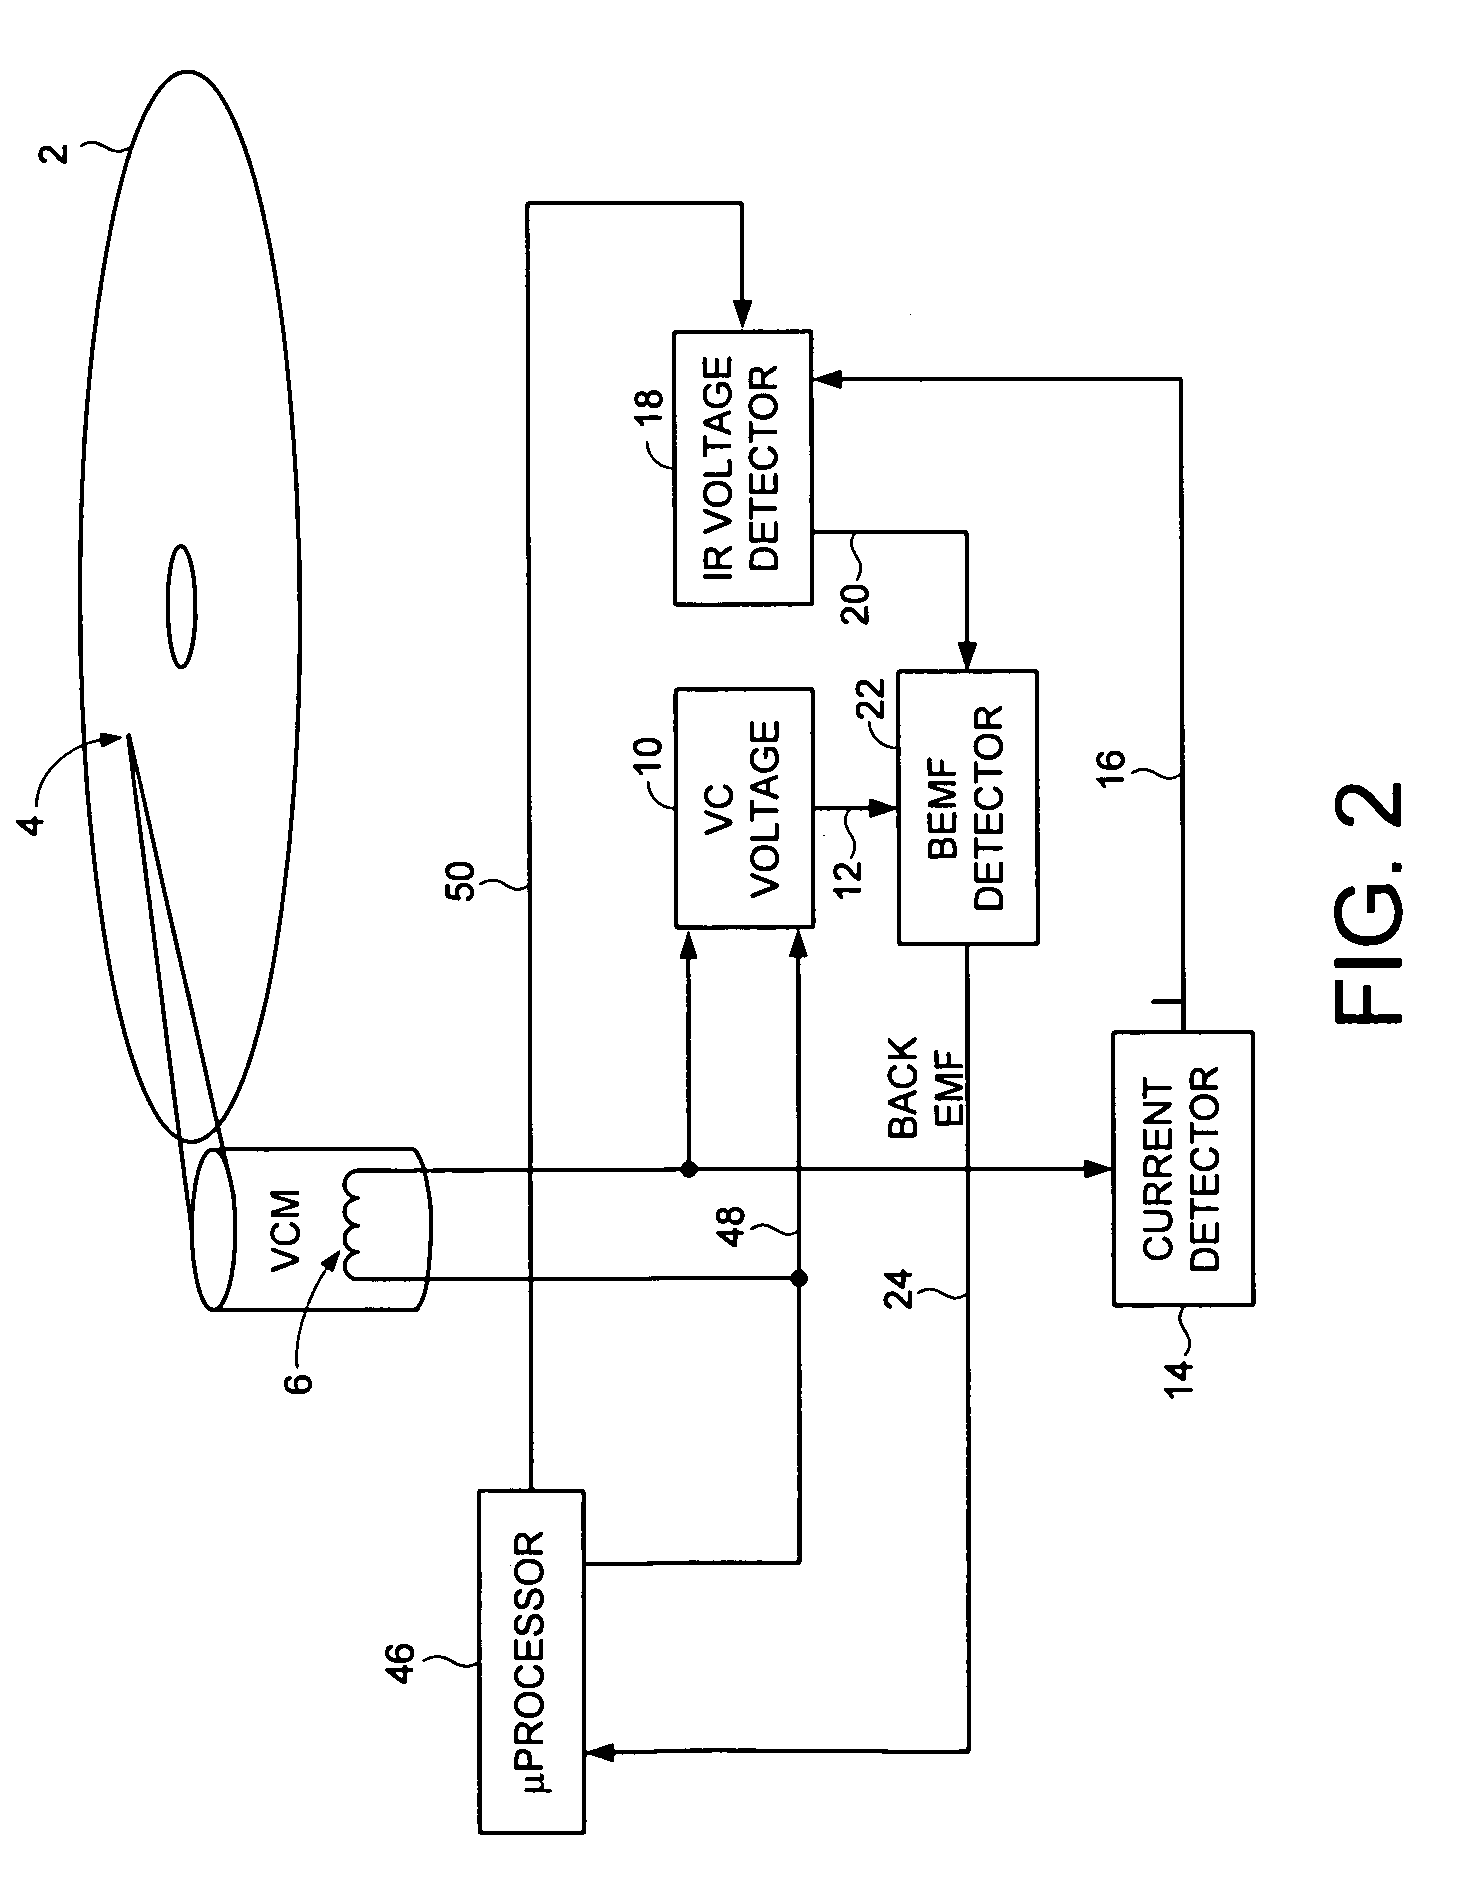 Disk drive updating estimate of voice coil resistance to account for resistance change prior to unload operation